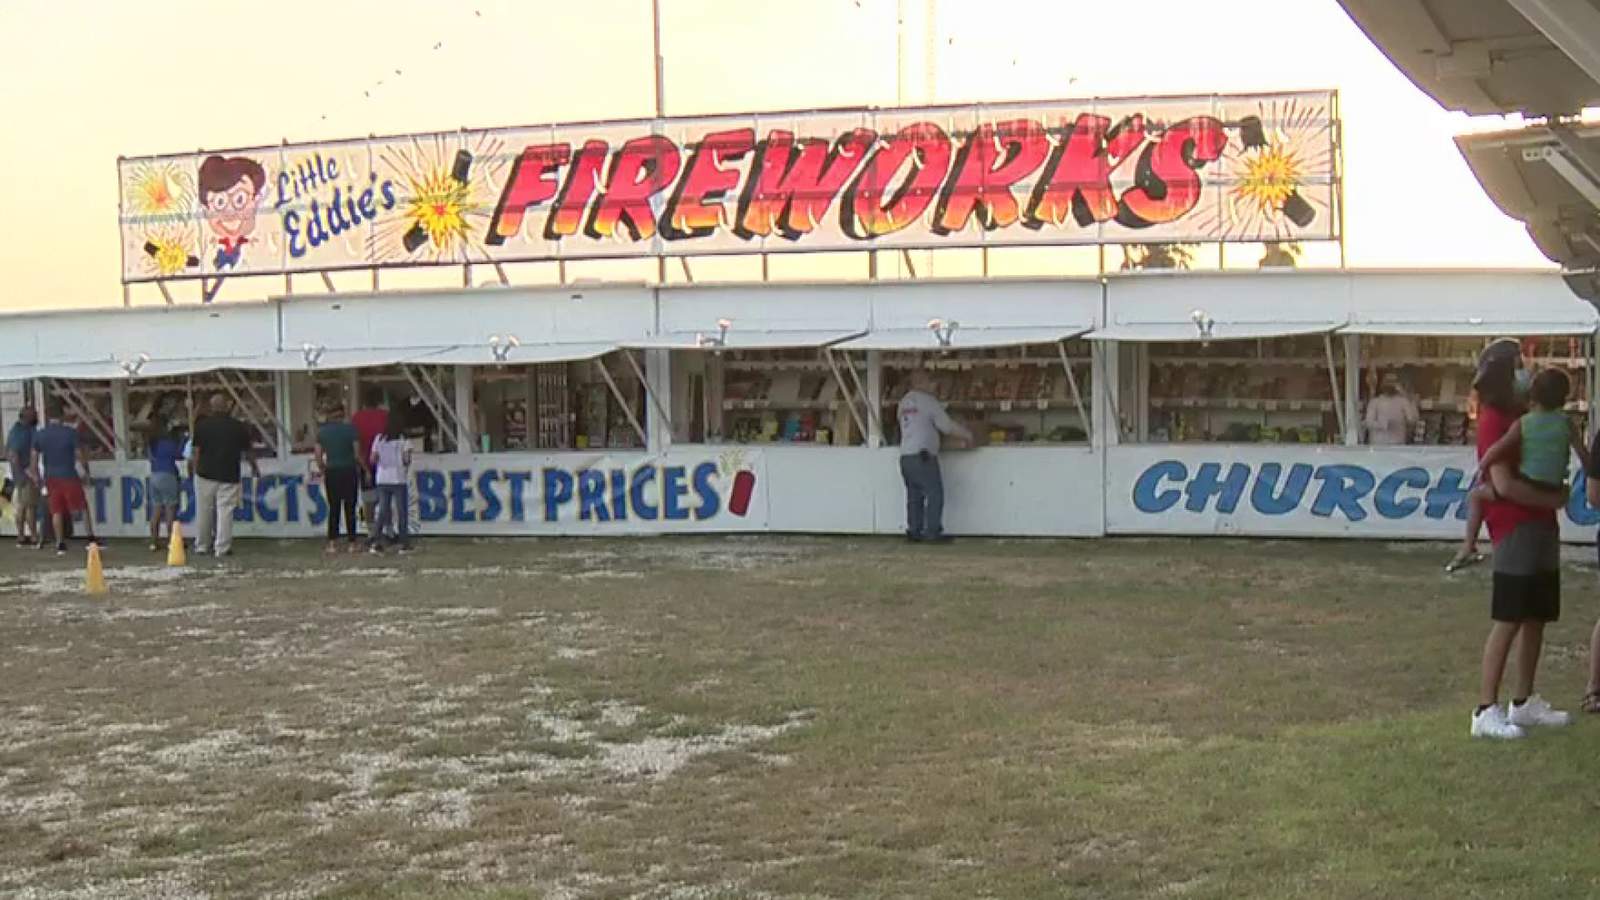 Bexar County Fire Marshals Office urges safe fireworks use in small group gatherings this Fourth of July